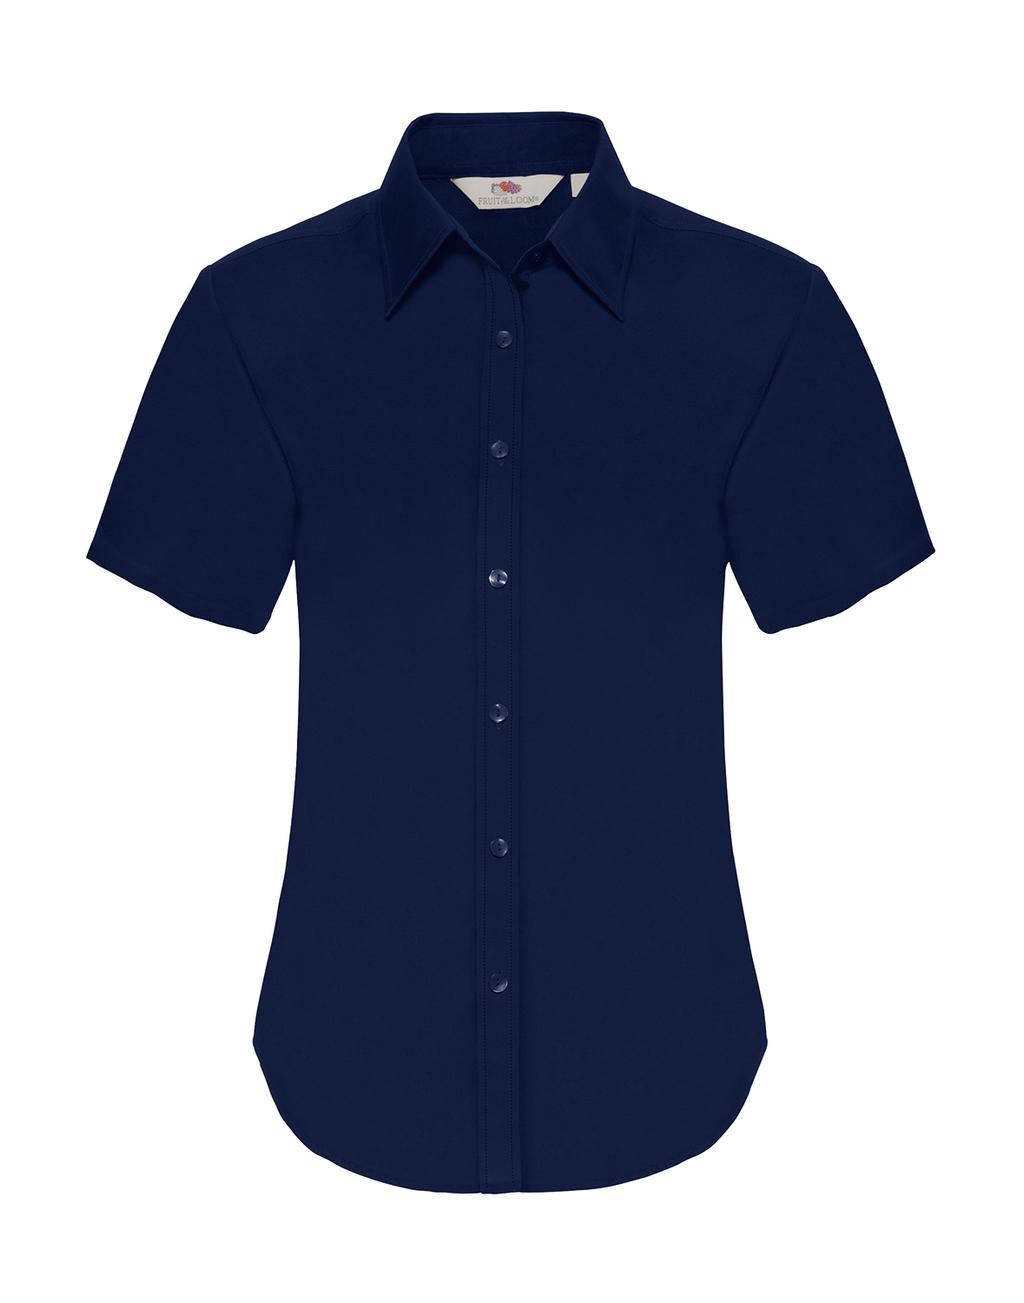  Ladies Oxford Shirt in Farbe Navy